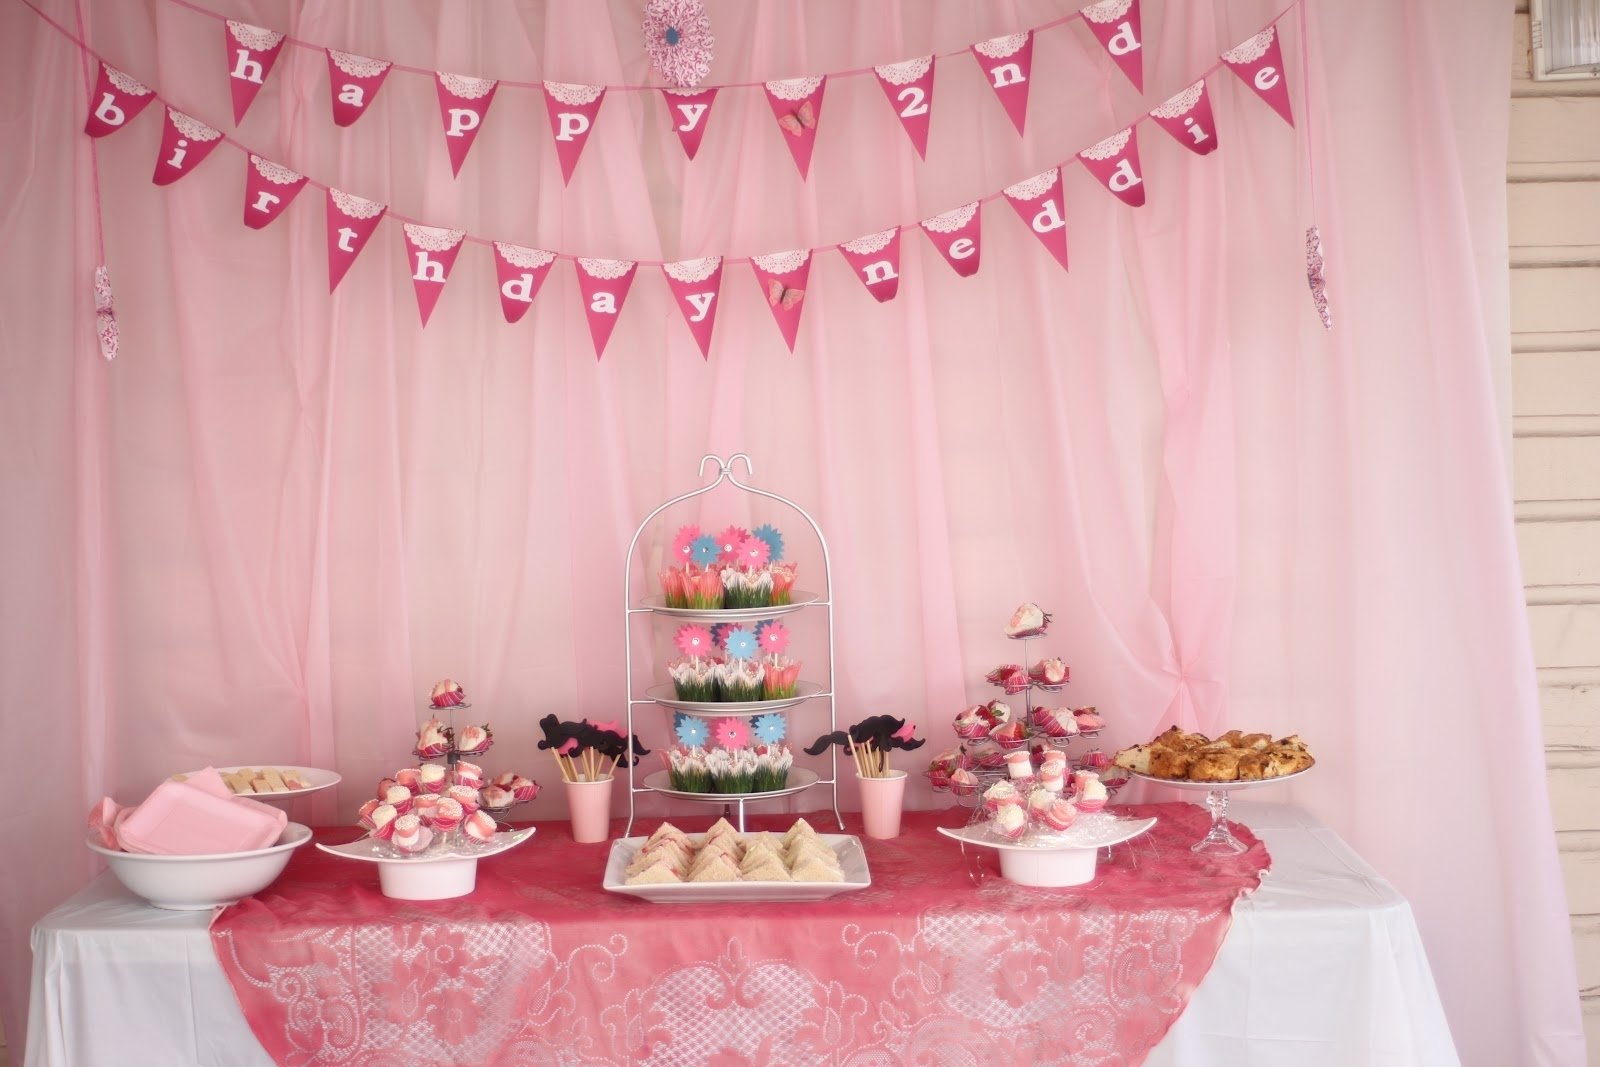 10 Fashionable Tea Party Birthday Party Ideas tea party for 2 year old birthday delicate construction 3 2023